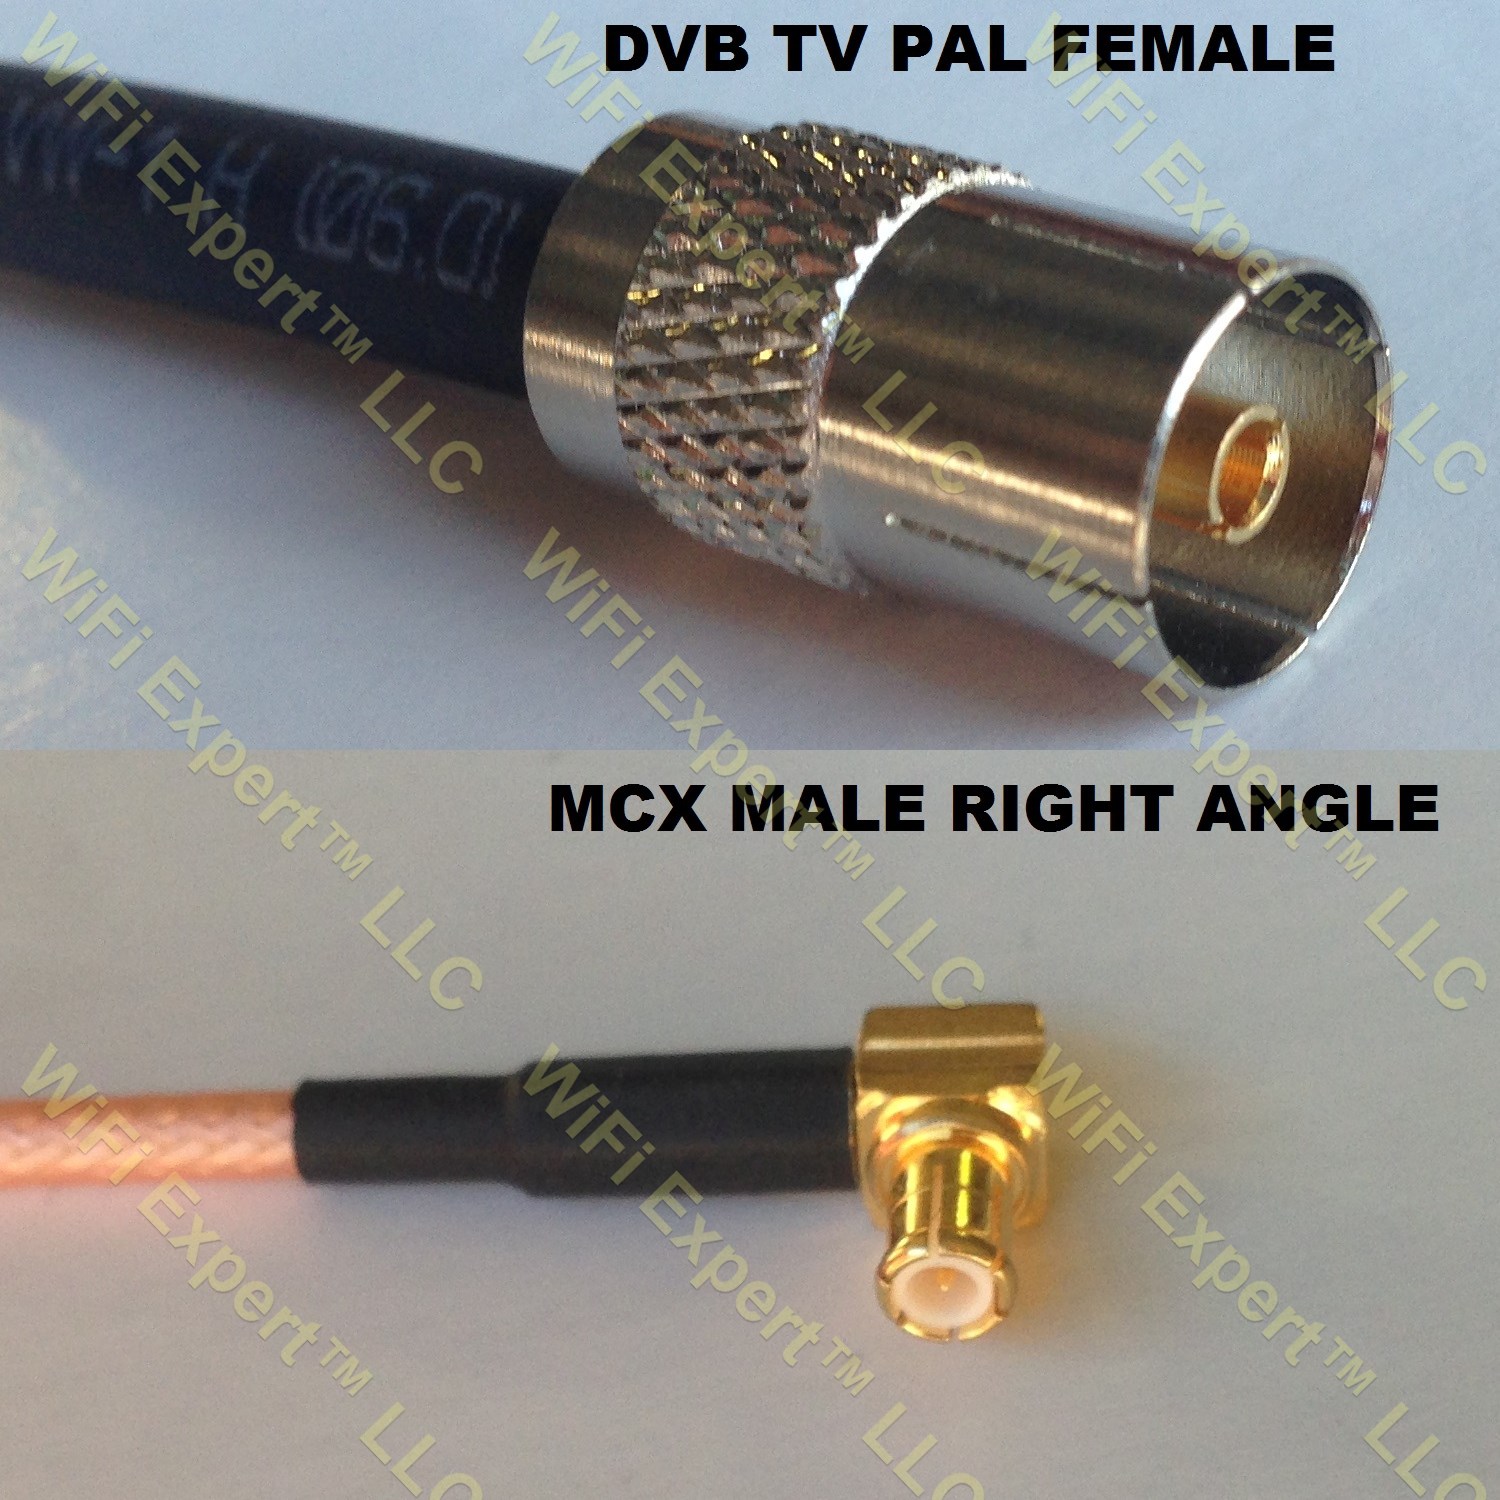 USA-CA RG316 MMCX MALE ANGLE to MCX FEMALE Coaxial RF Pigtail Cable 